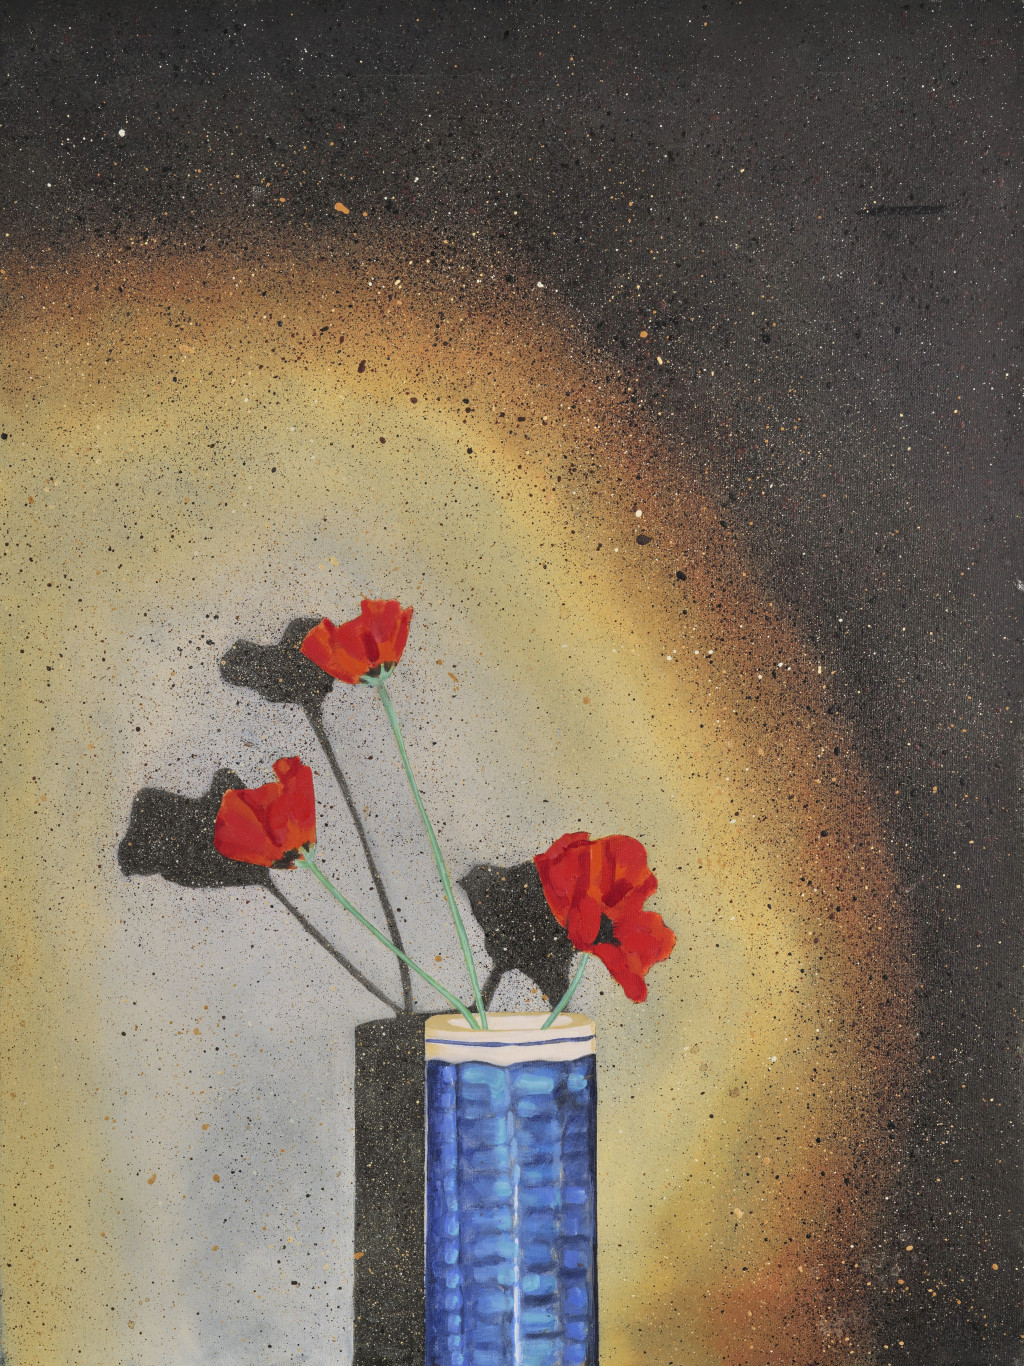 Cool blue vase with warm background and poppies